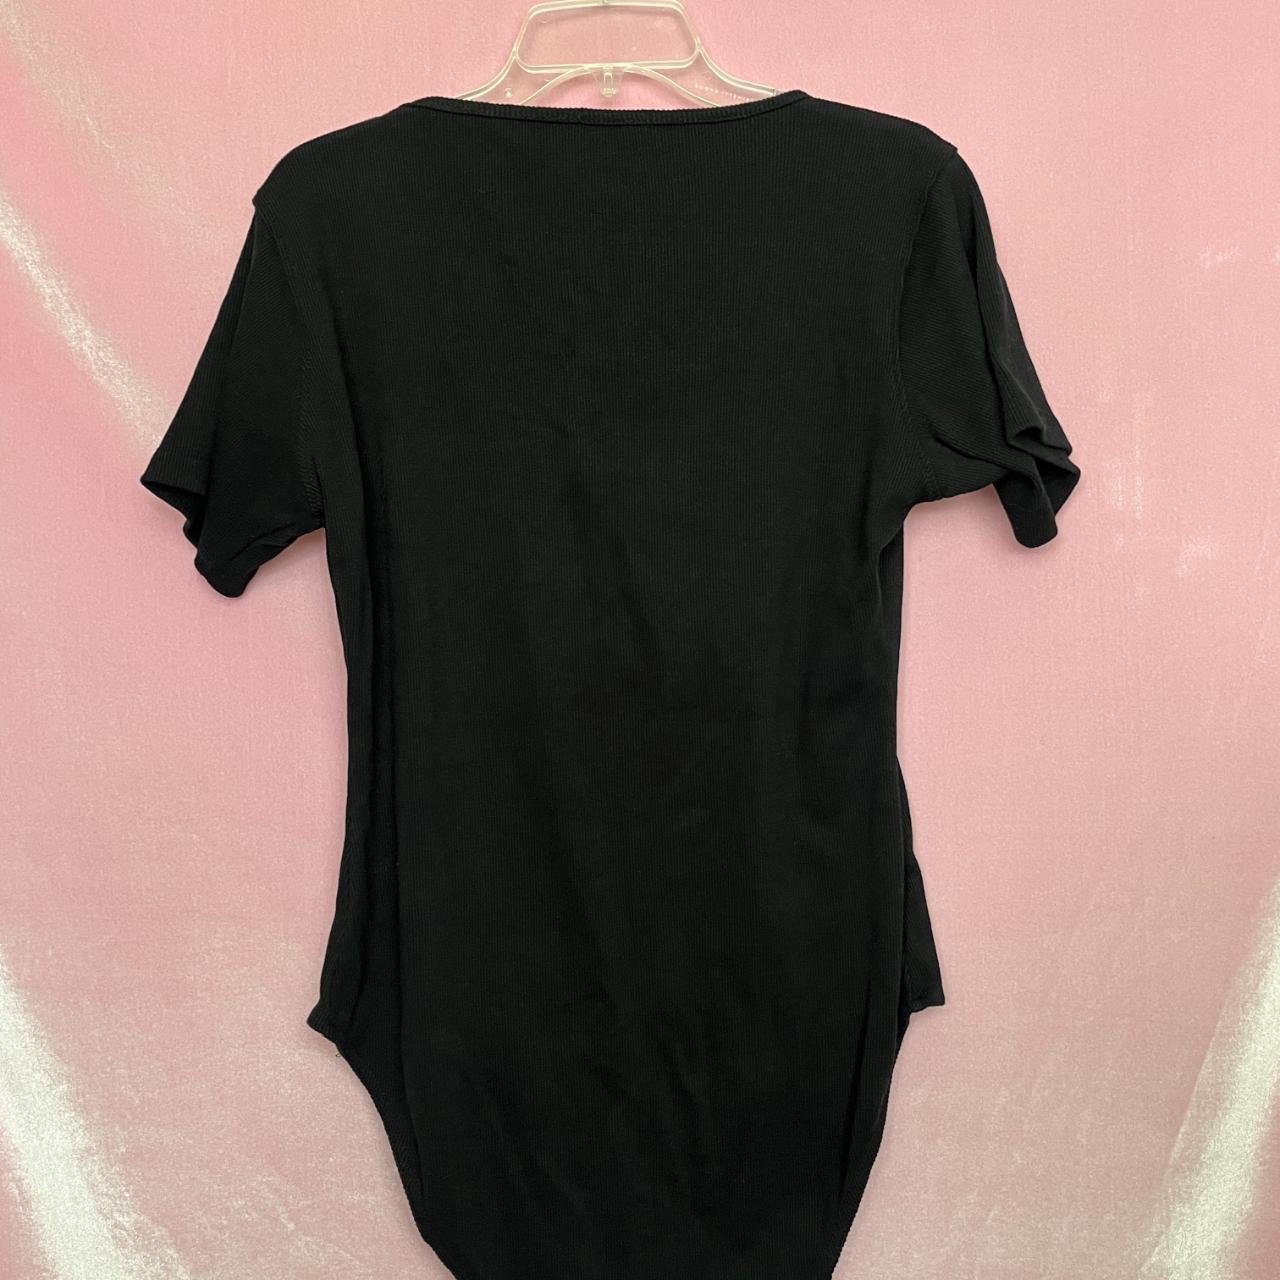 Plus Size Scoop Neck Ribbed Bodysuit from Nasty Gal